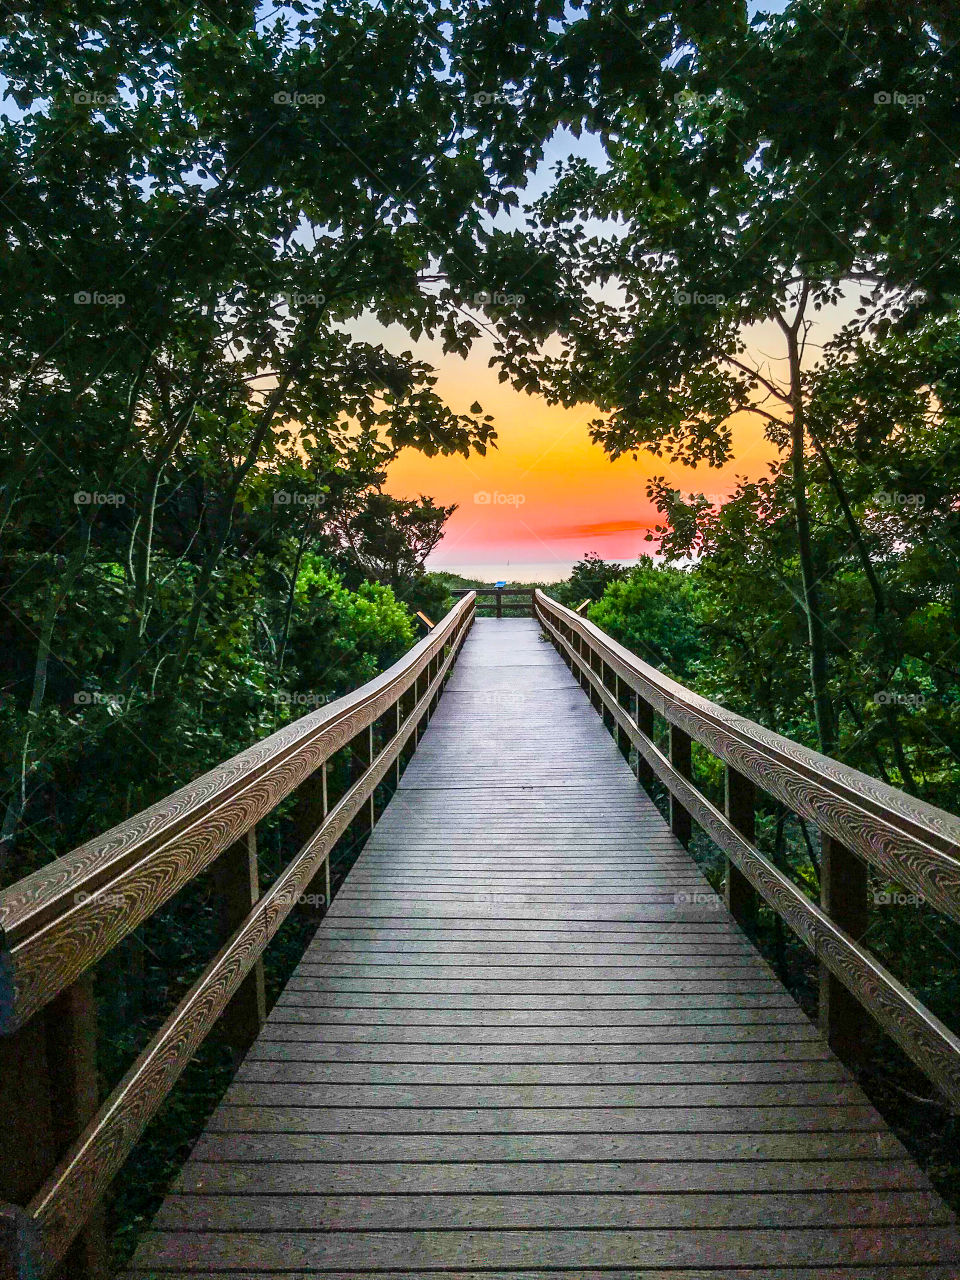 Boardwalk to Paradise - take the new path - leave the past behind.  